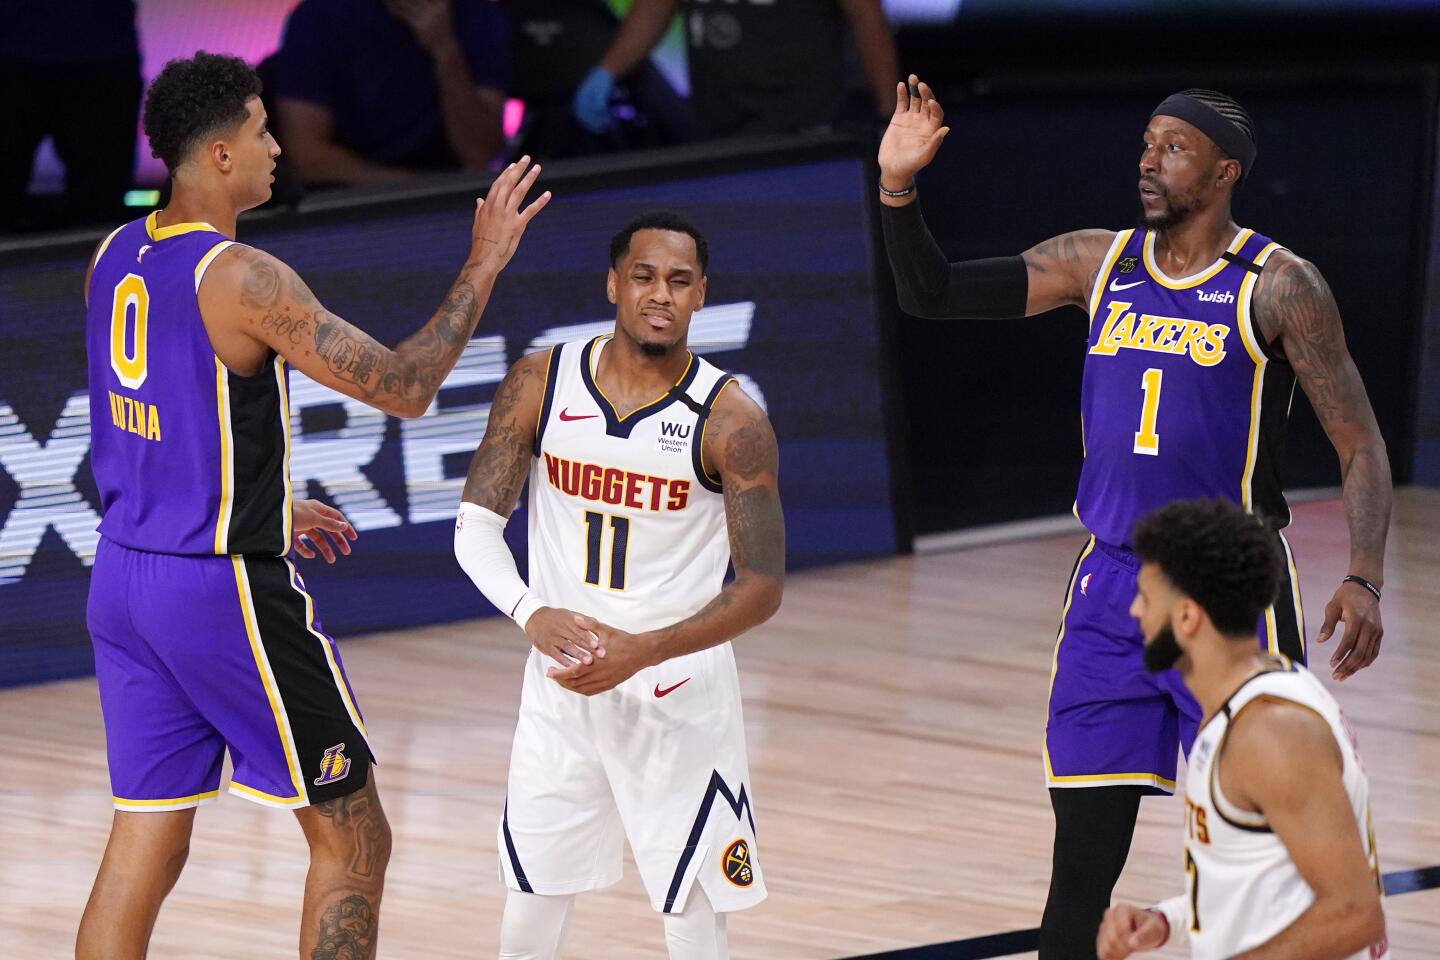 Lakers forward Kyle Kuzma (0) and guard Kentavious Caldwell-Pope (1) with Nuggets guard Monte Morris (11) during Game 5.